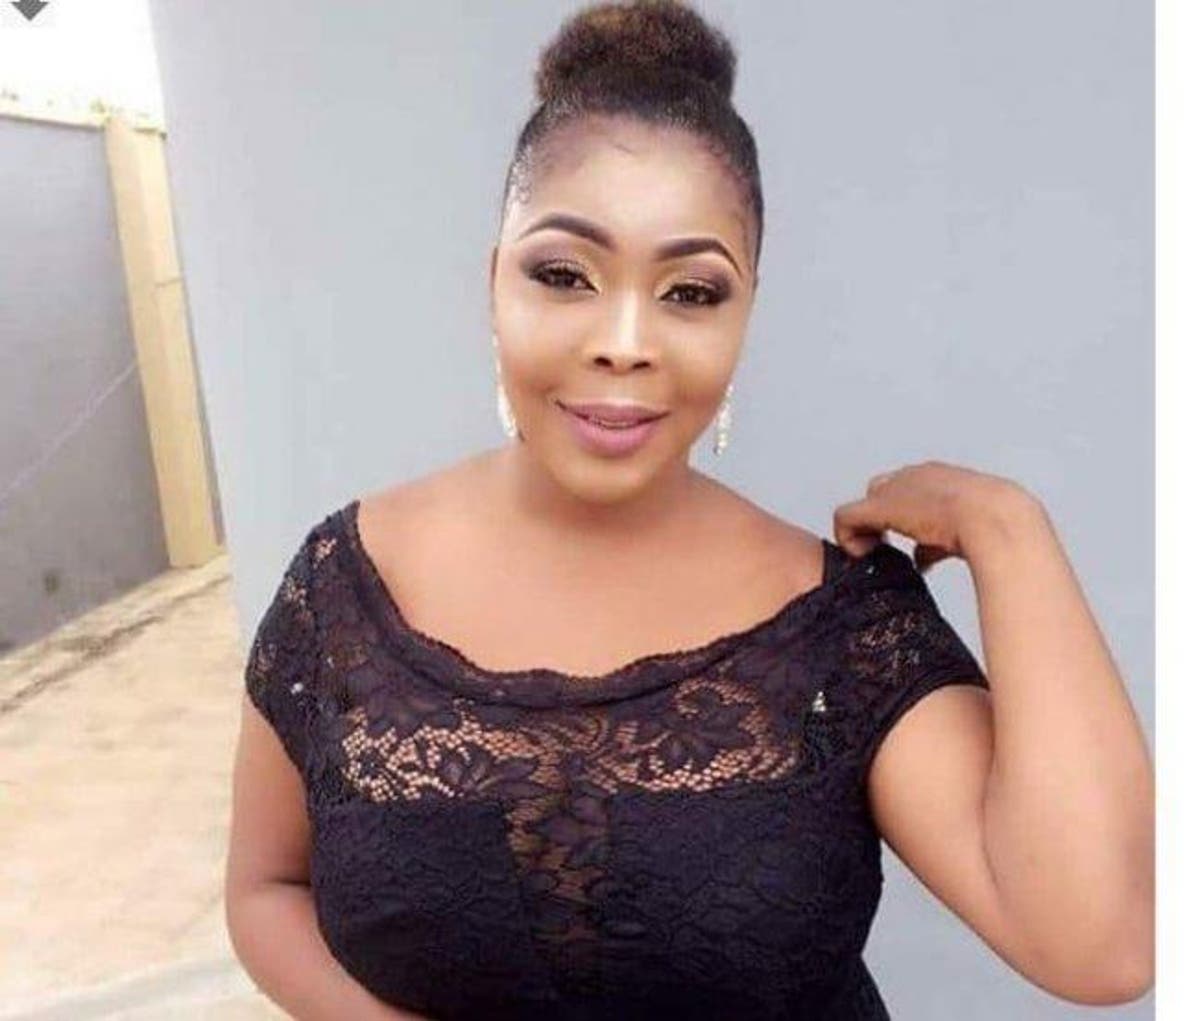 Why People Should Not Generalize Actress As Prostitutes – Joke Lawal